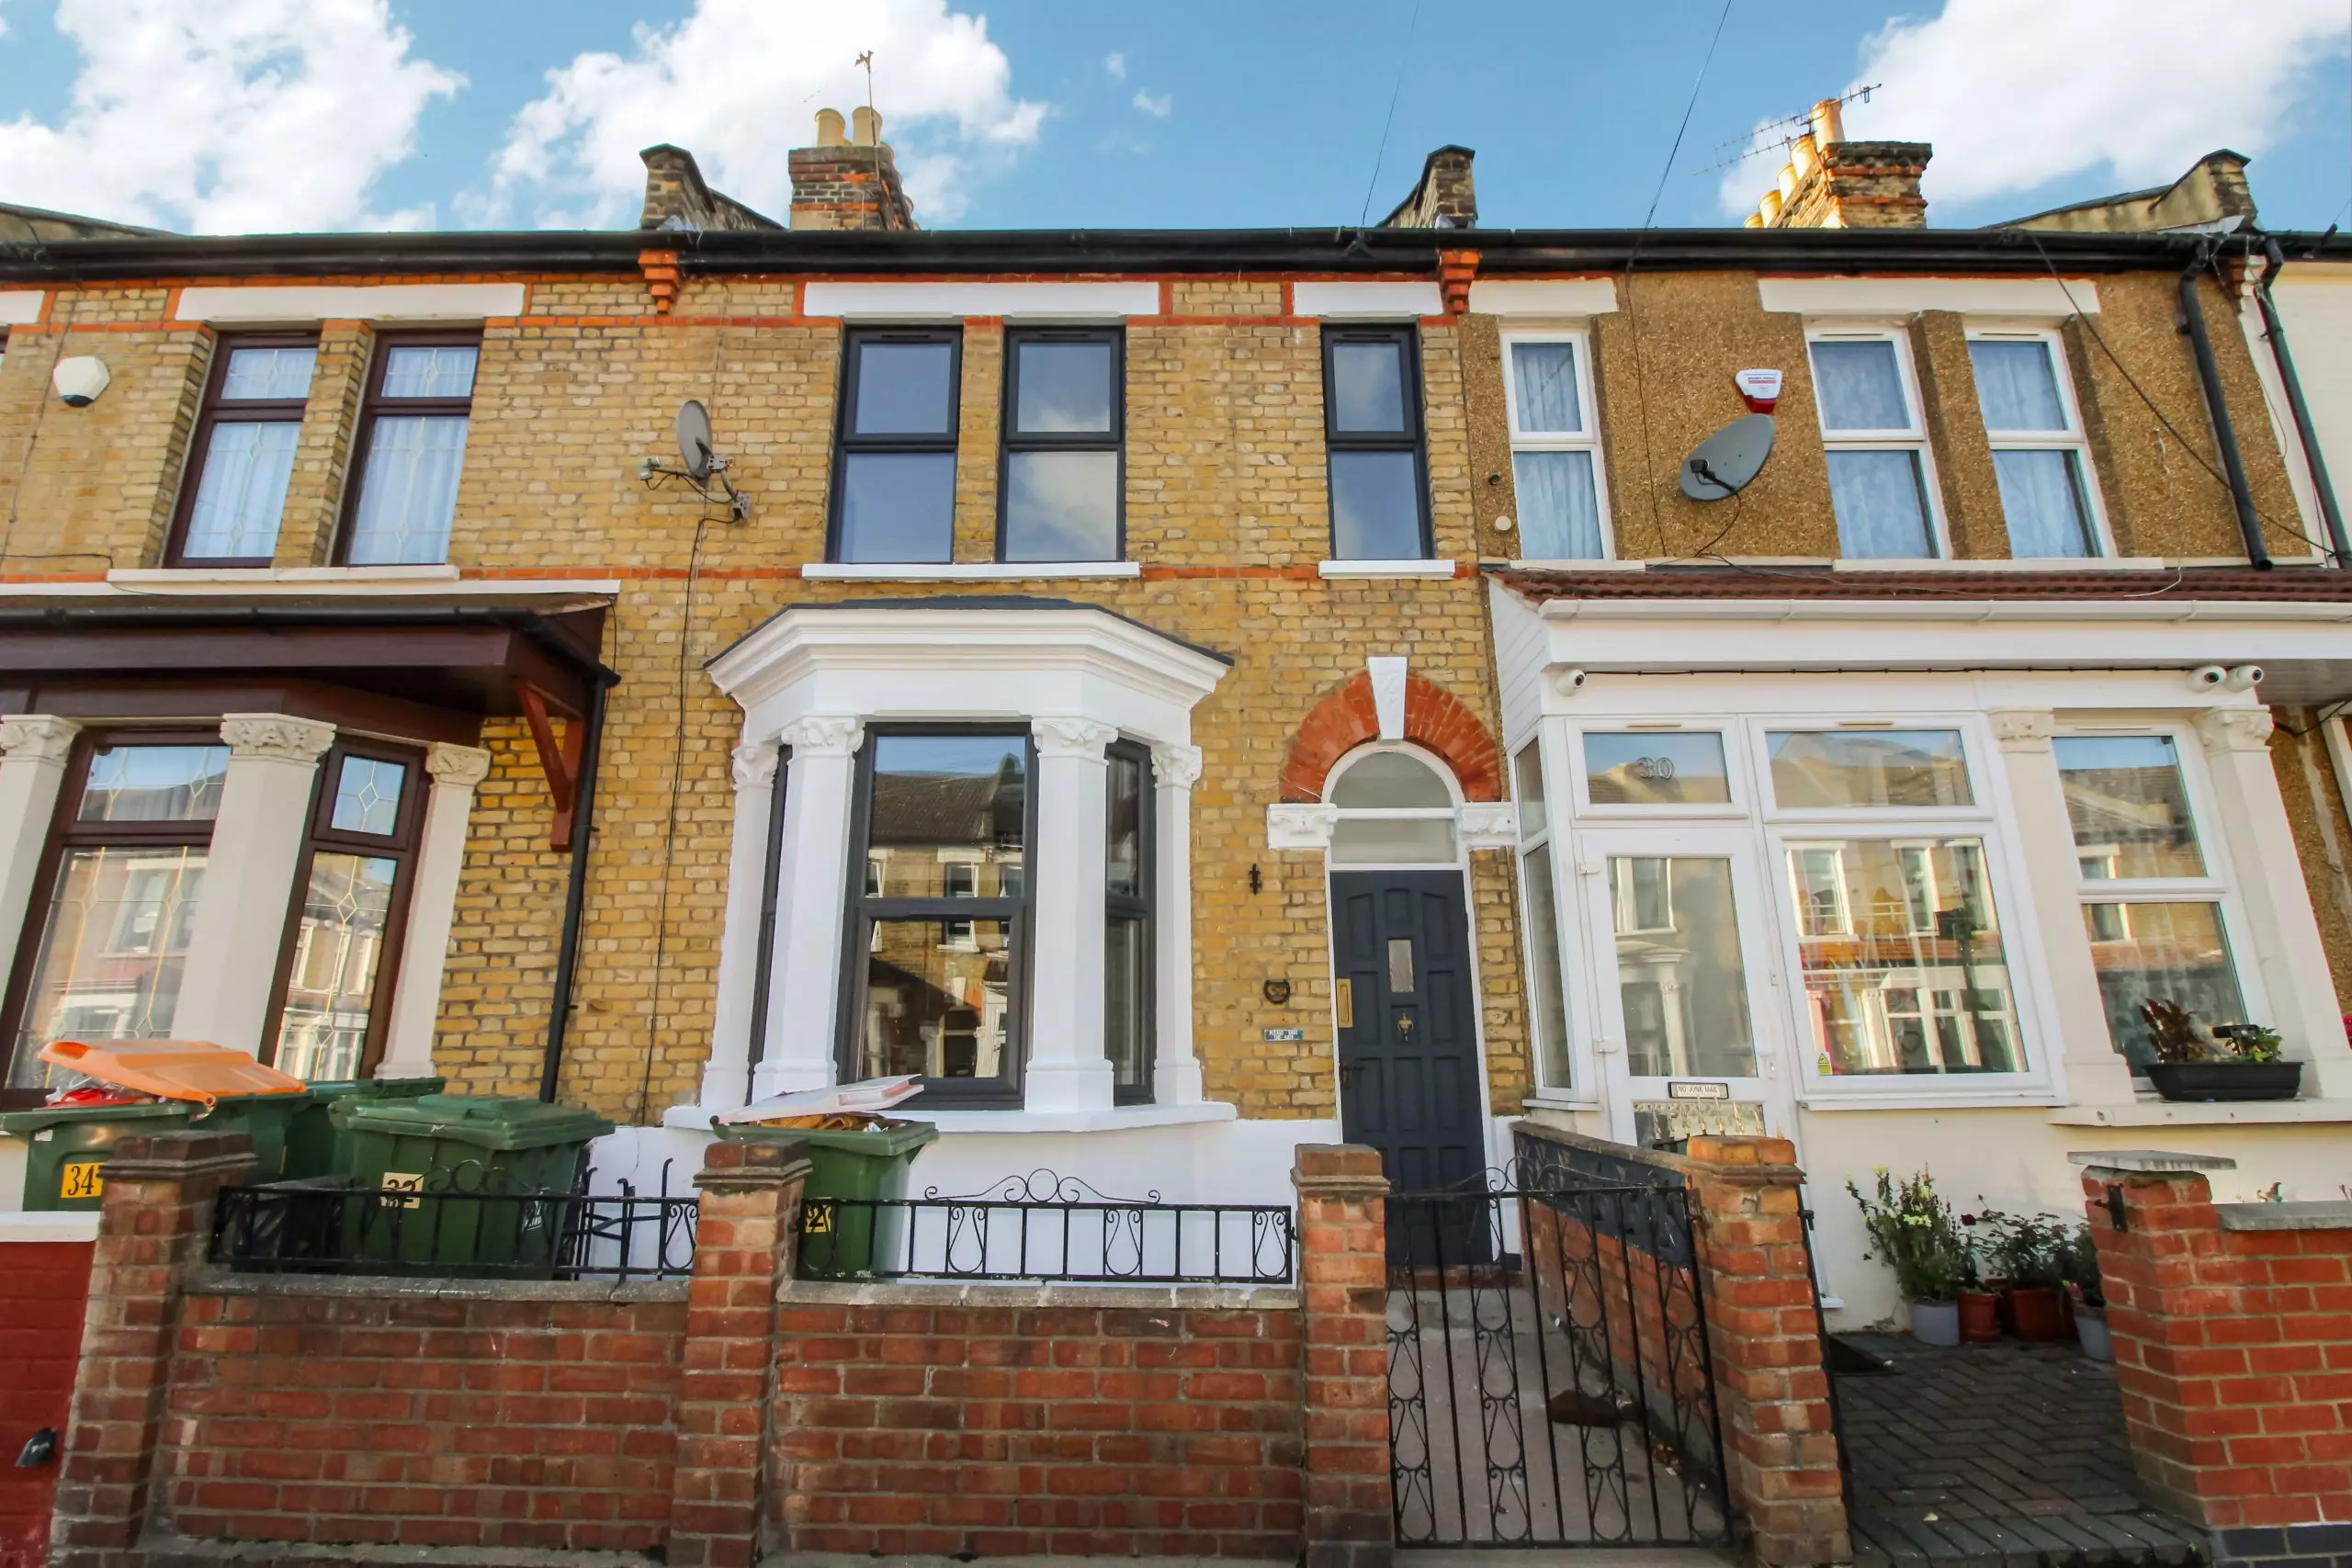 Five Double Bedroom Terraced House In Beauchamp Road, London